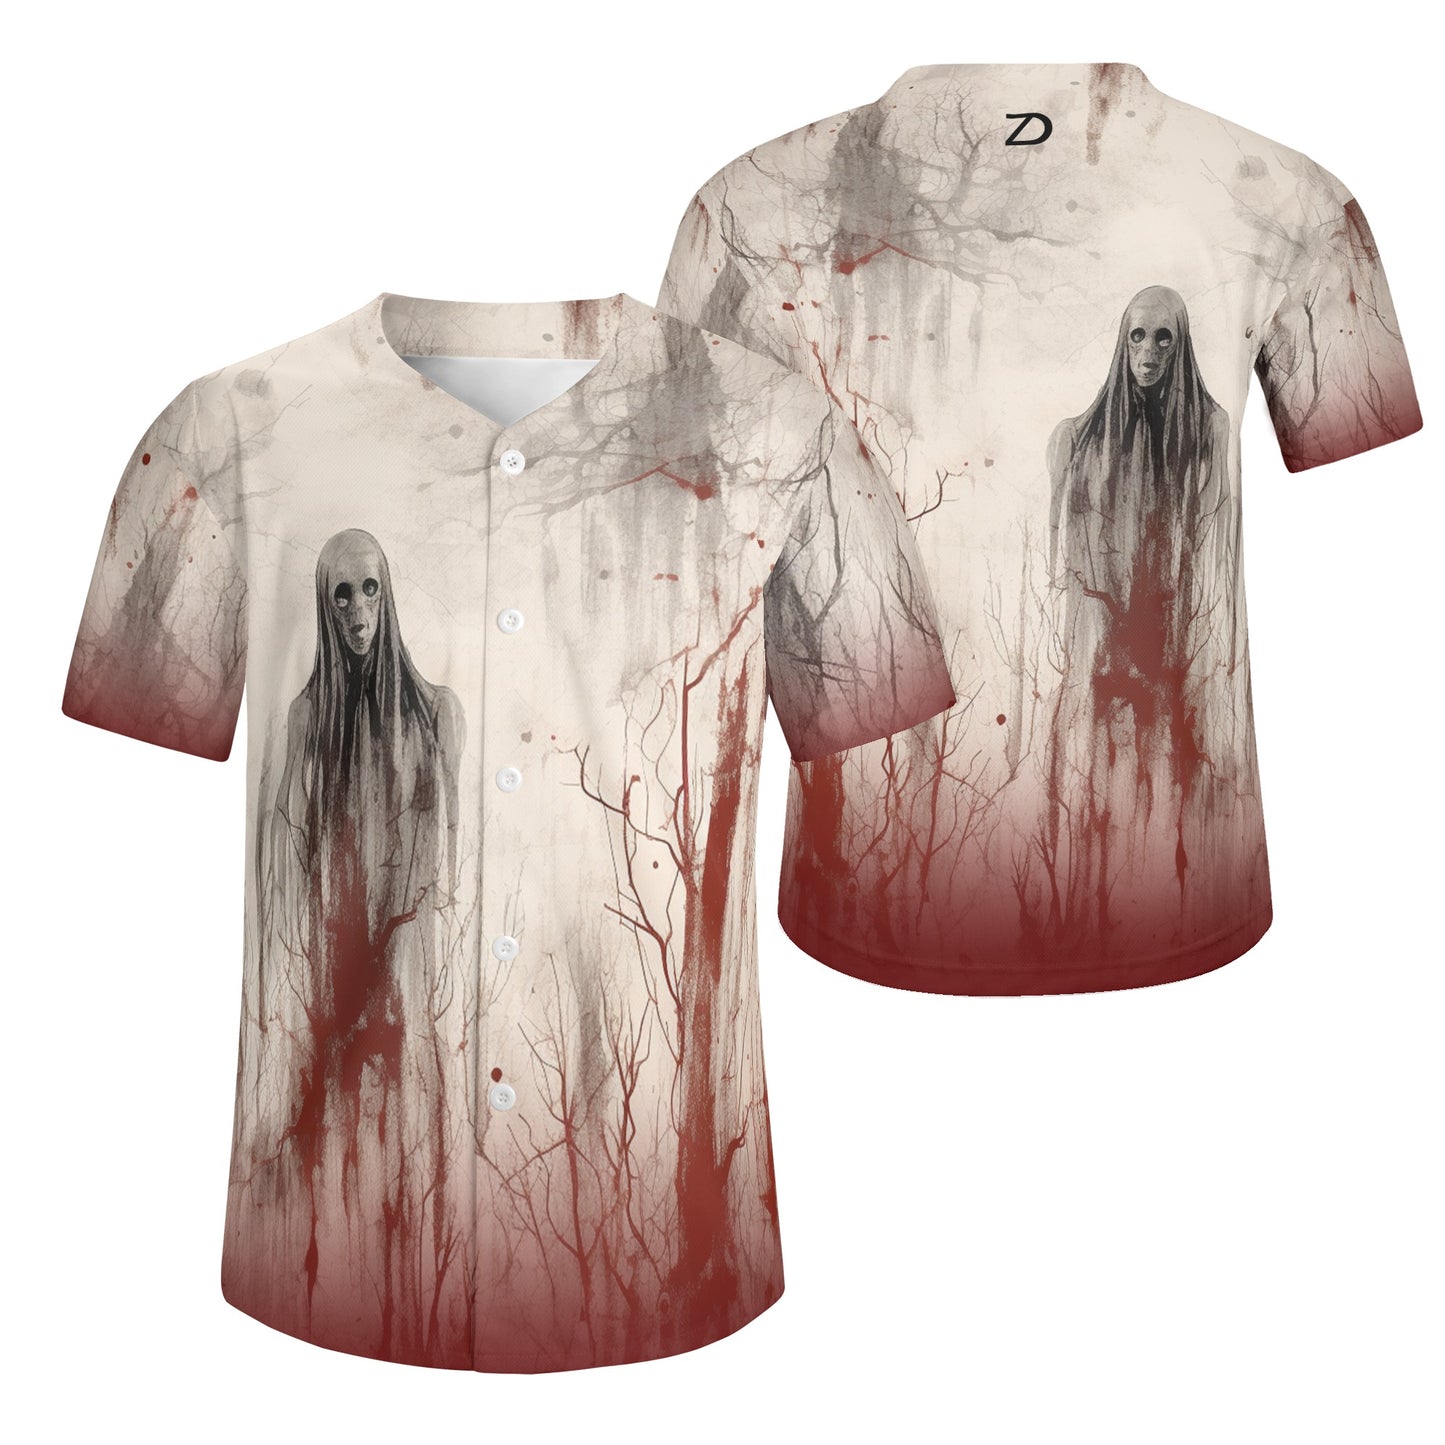 Neduz Mens Horror Spooky Short Sleeve Baseball Jersey: Stay Spooky and Stylish on the Field or in the Stands